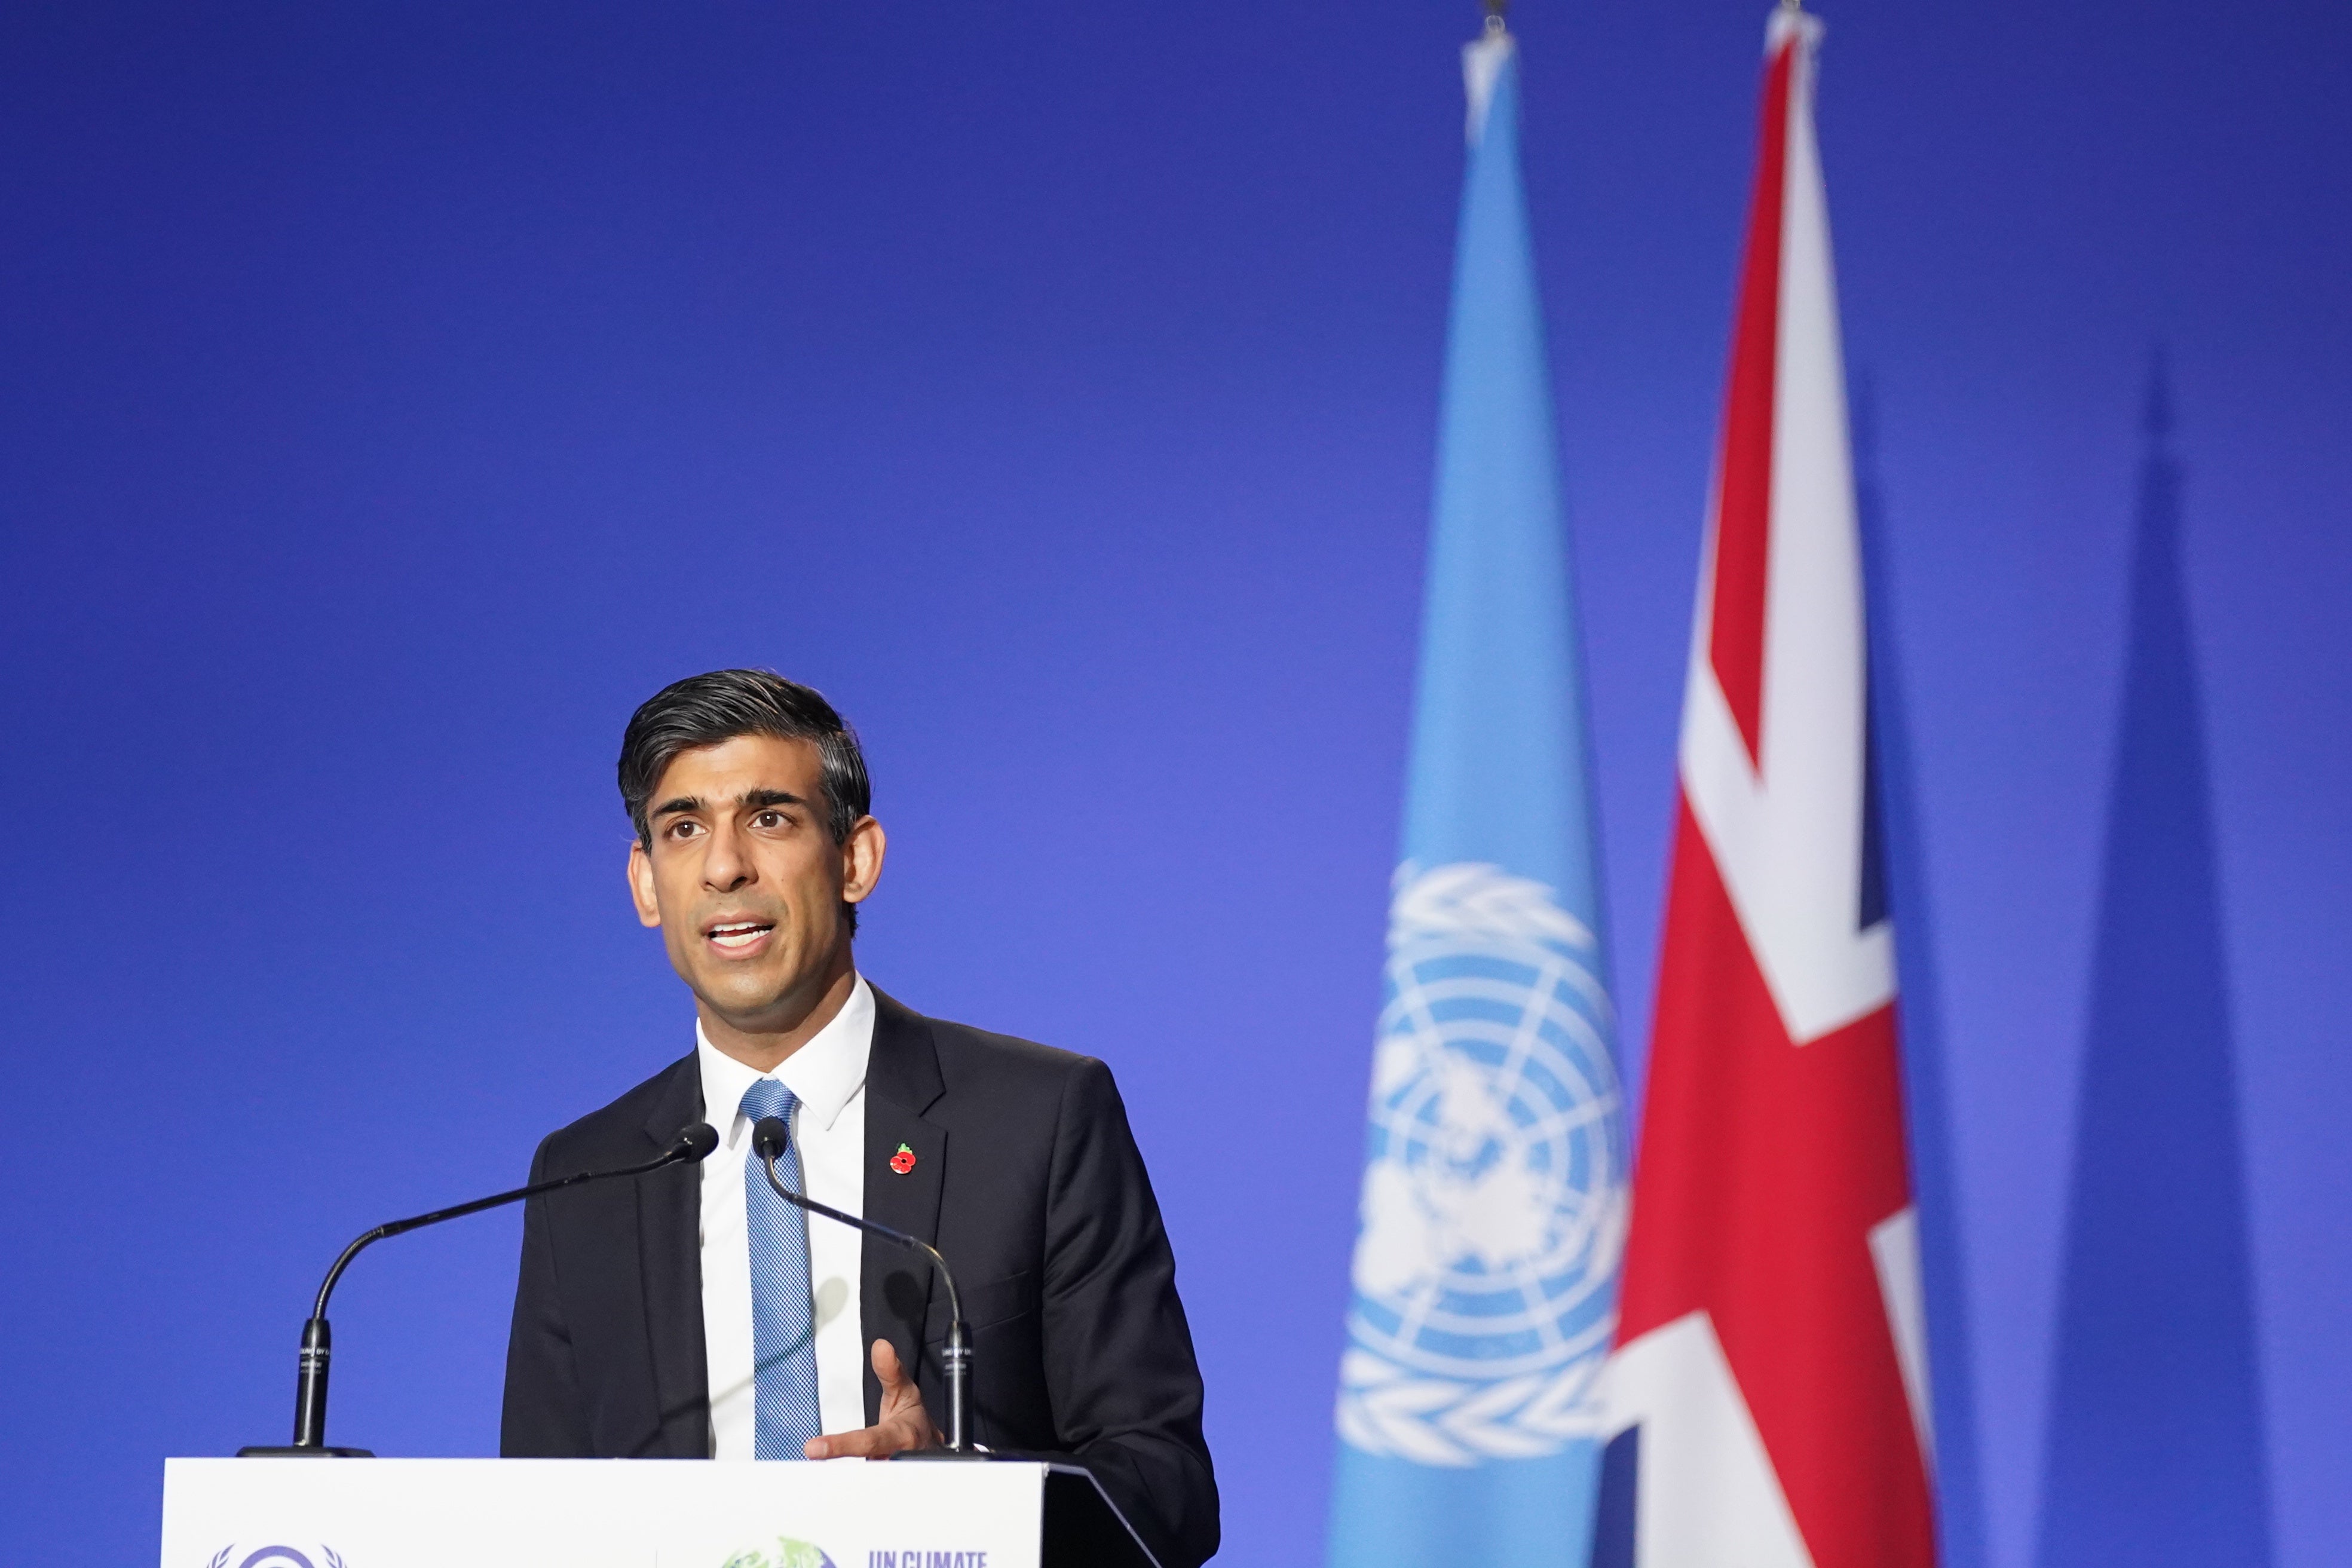 Chancellor Rishi Sunak will face a politically uncomfortable year ahead as inflation eats into real wages and benefits for the most vulnerable households.